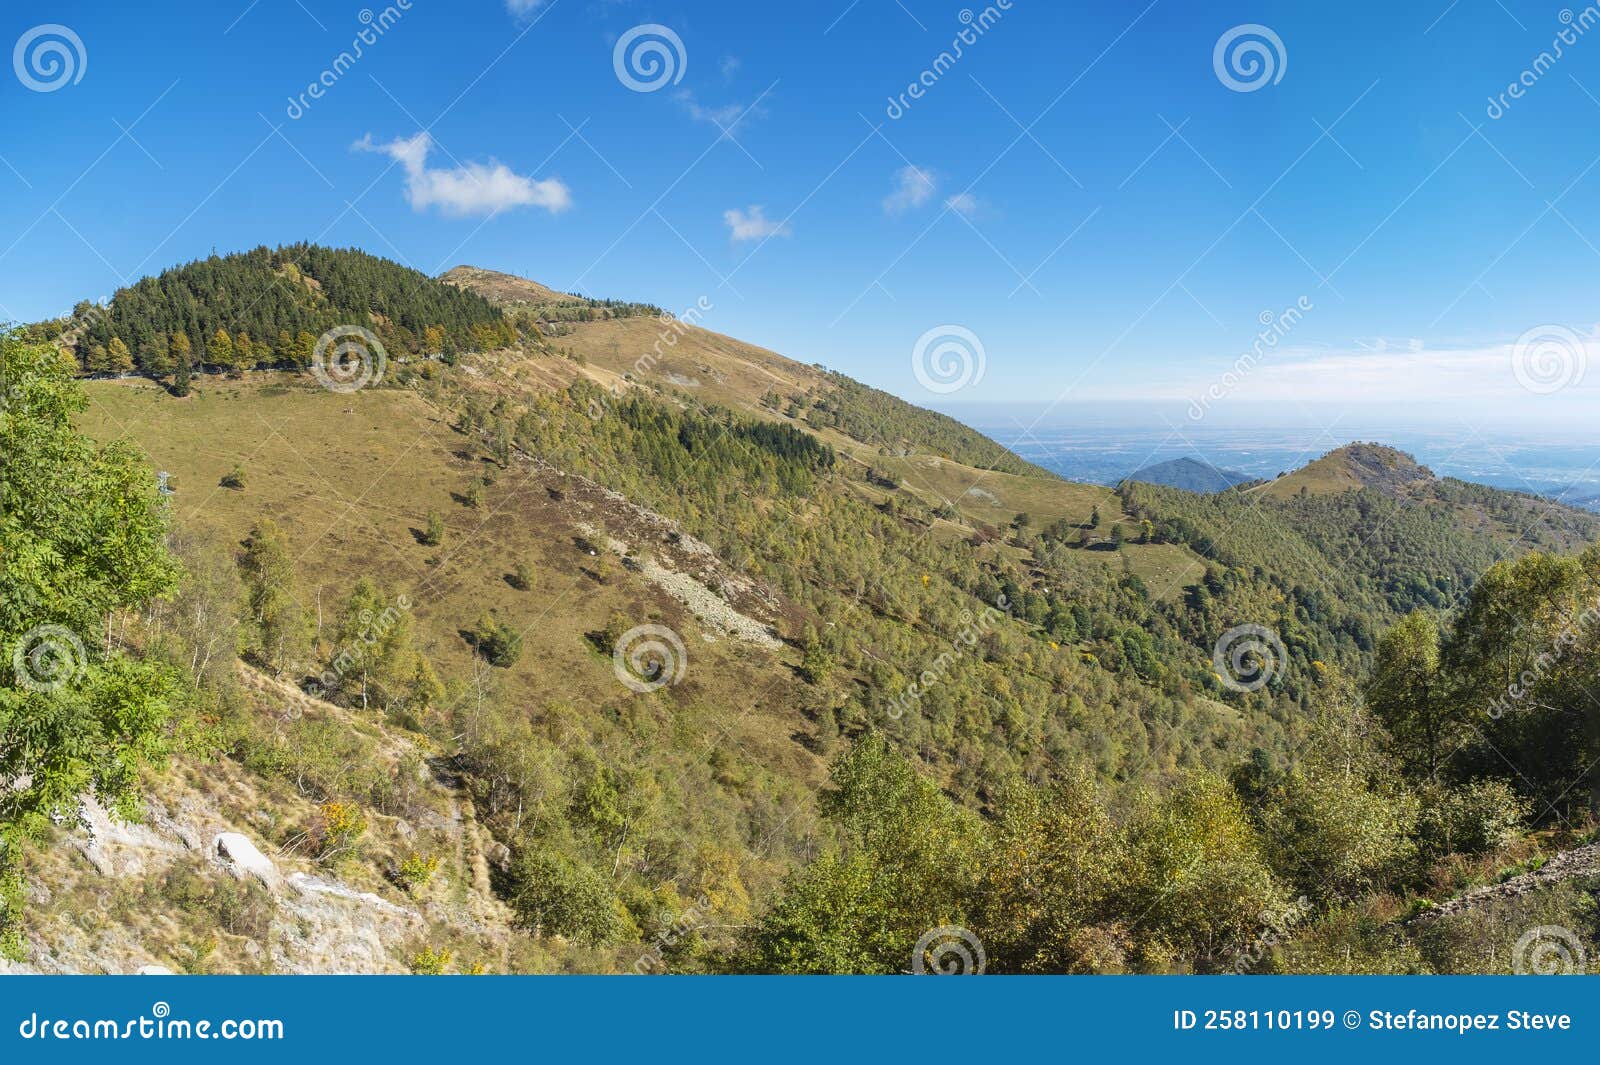 the panoramica zegna viewpoint, piedmont, northern italy. color image